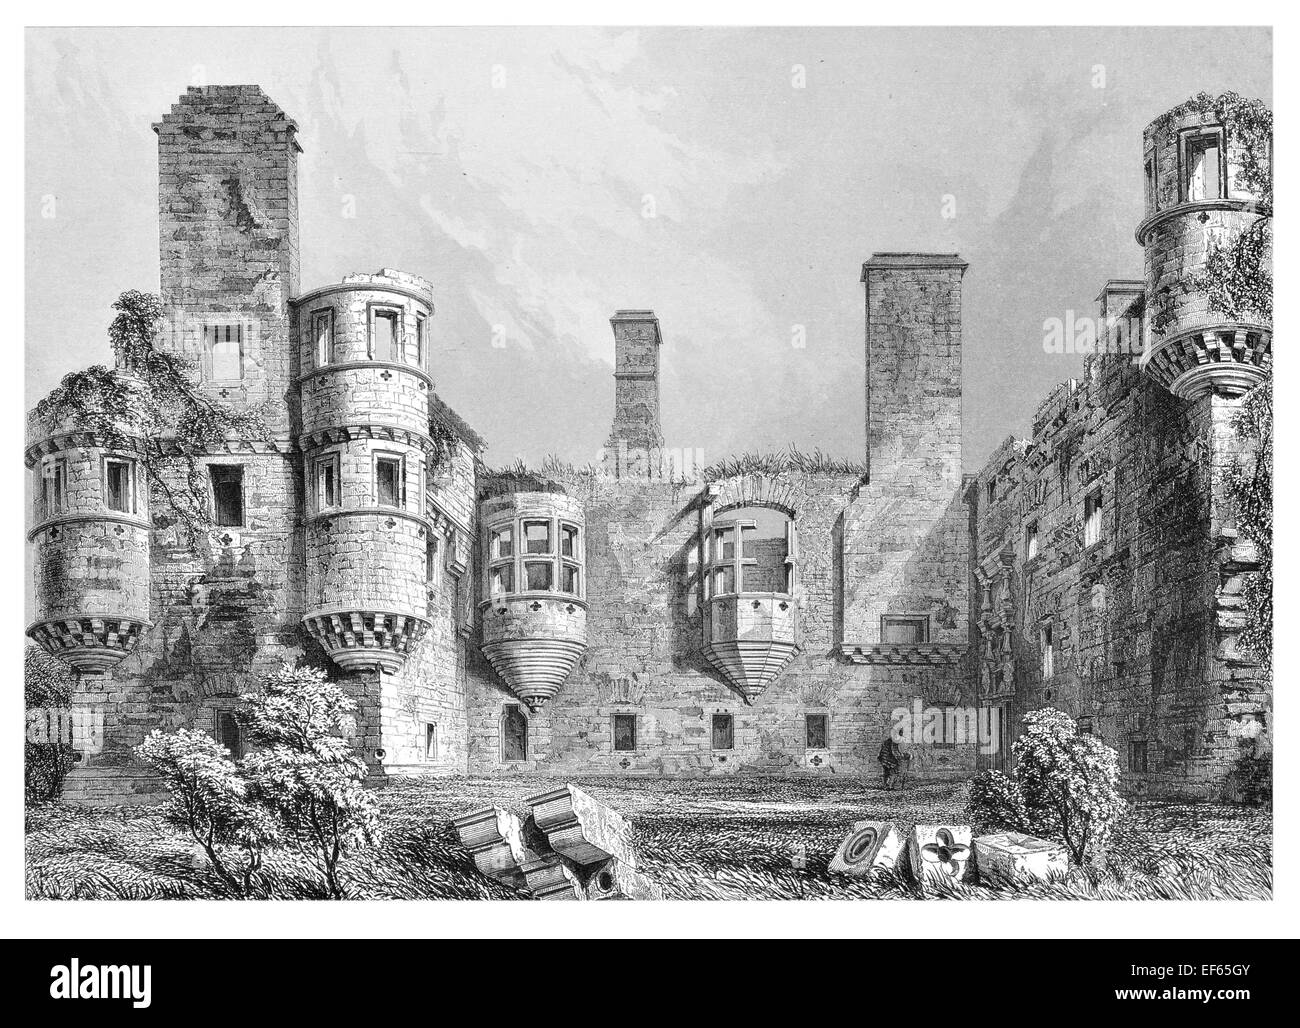 1852 Earl's Palace Kirkwall  Orkney island built by tyrannical Patrick Stewart early 17th century ruin Stock Photo